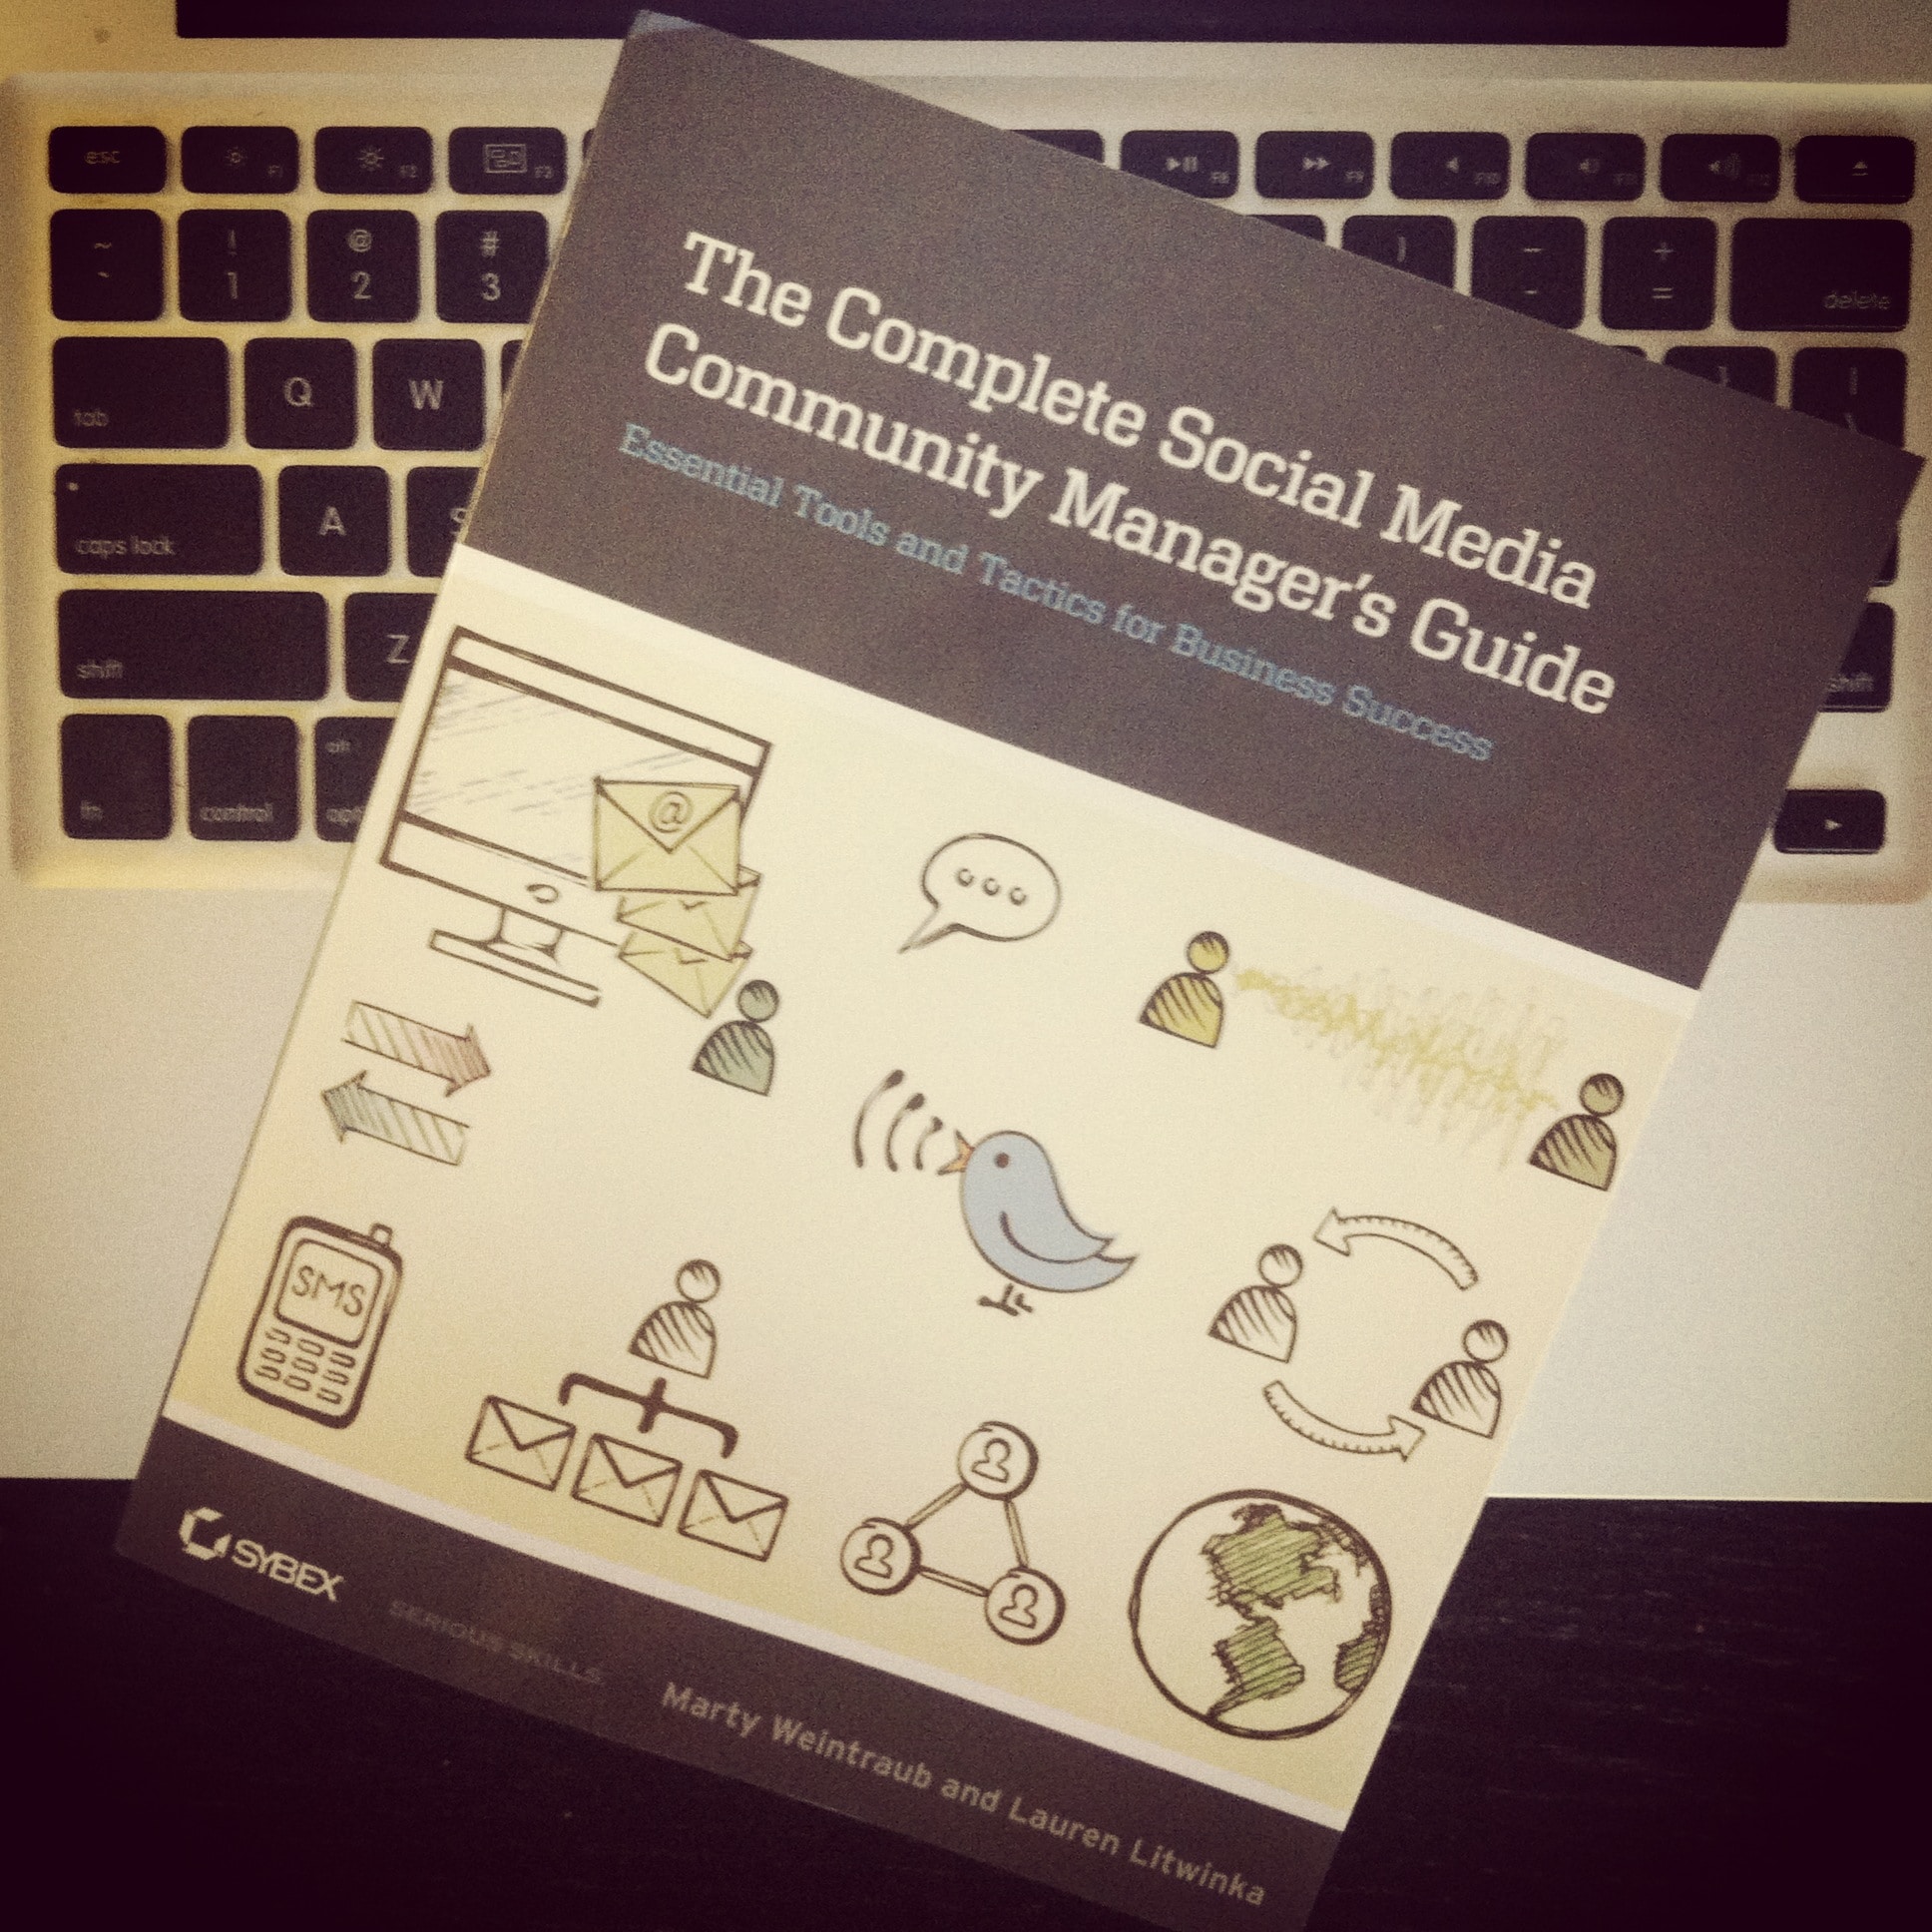 The Complete Social Media Community Manager's Guide